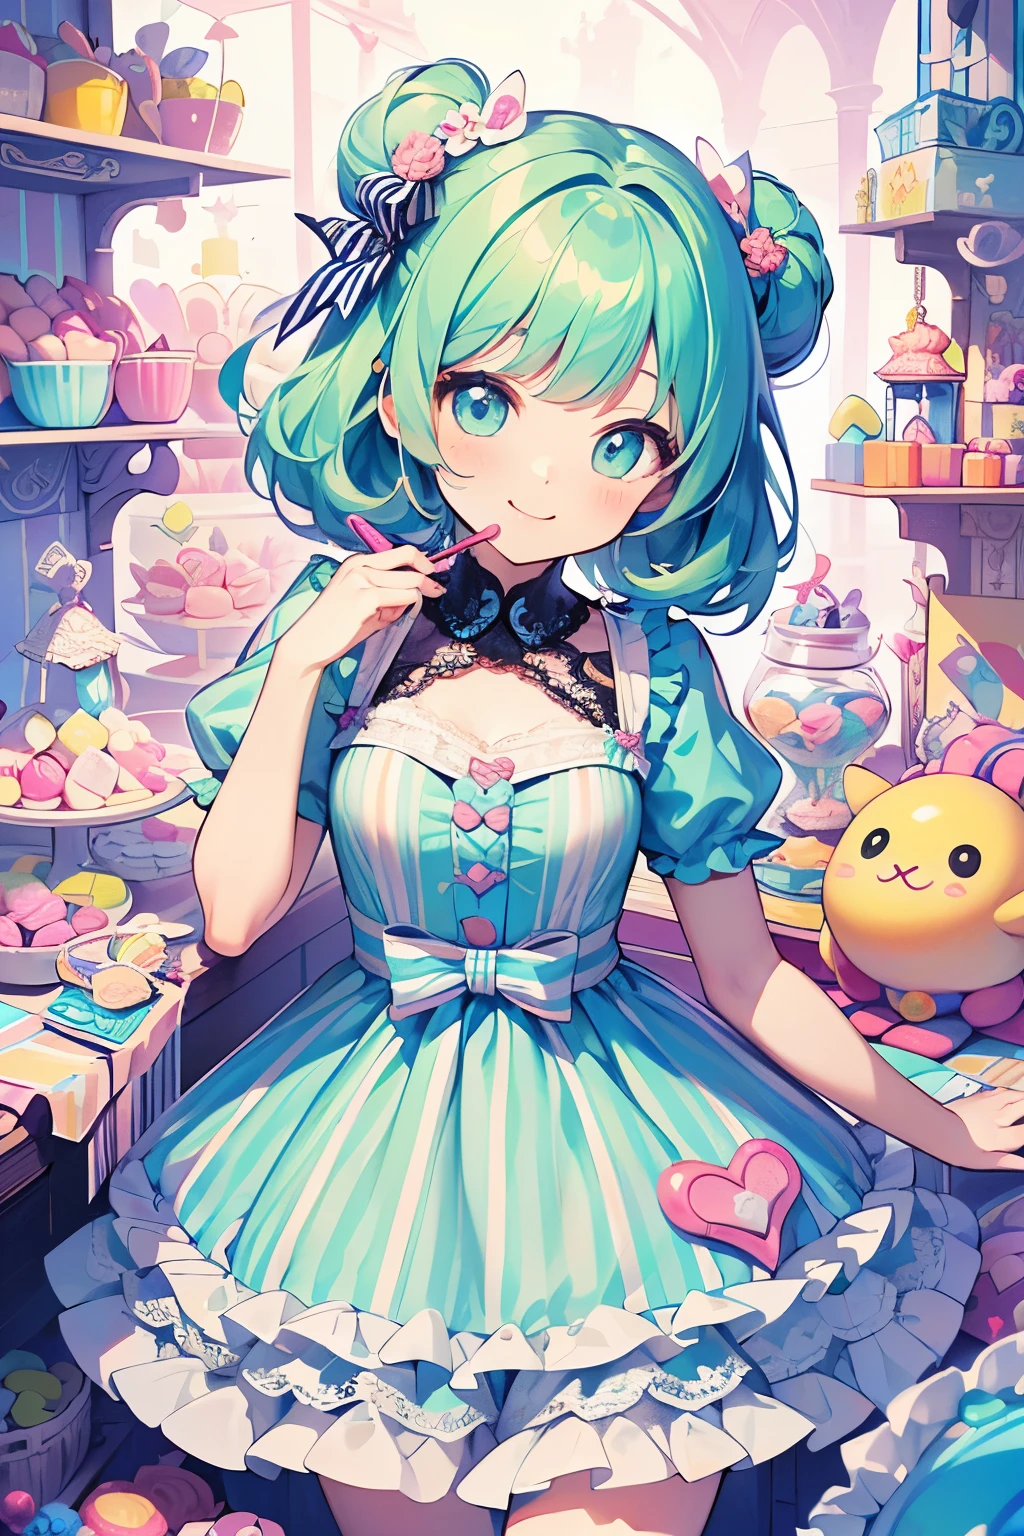 chibi character,Circus motif,(brush),((cute,kawaii,wonderland)),((pastel color)),((Cute assortment)),(smile、looks fun),((Lots of toys and sweets:1.1)),((Cute frill and lace striped dress:1.3)),Shiny hair,(Natural Color),((:1.2)),(Fairytale:1.25).